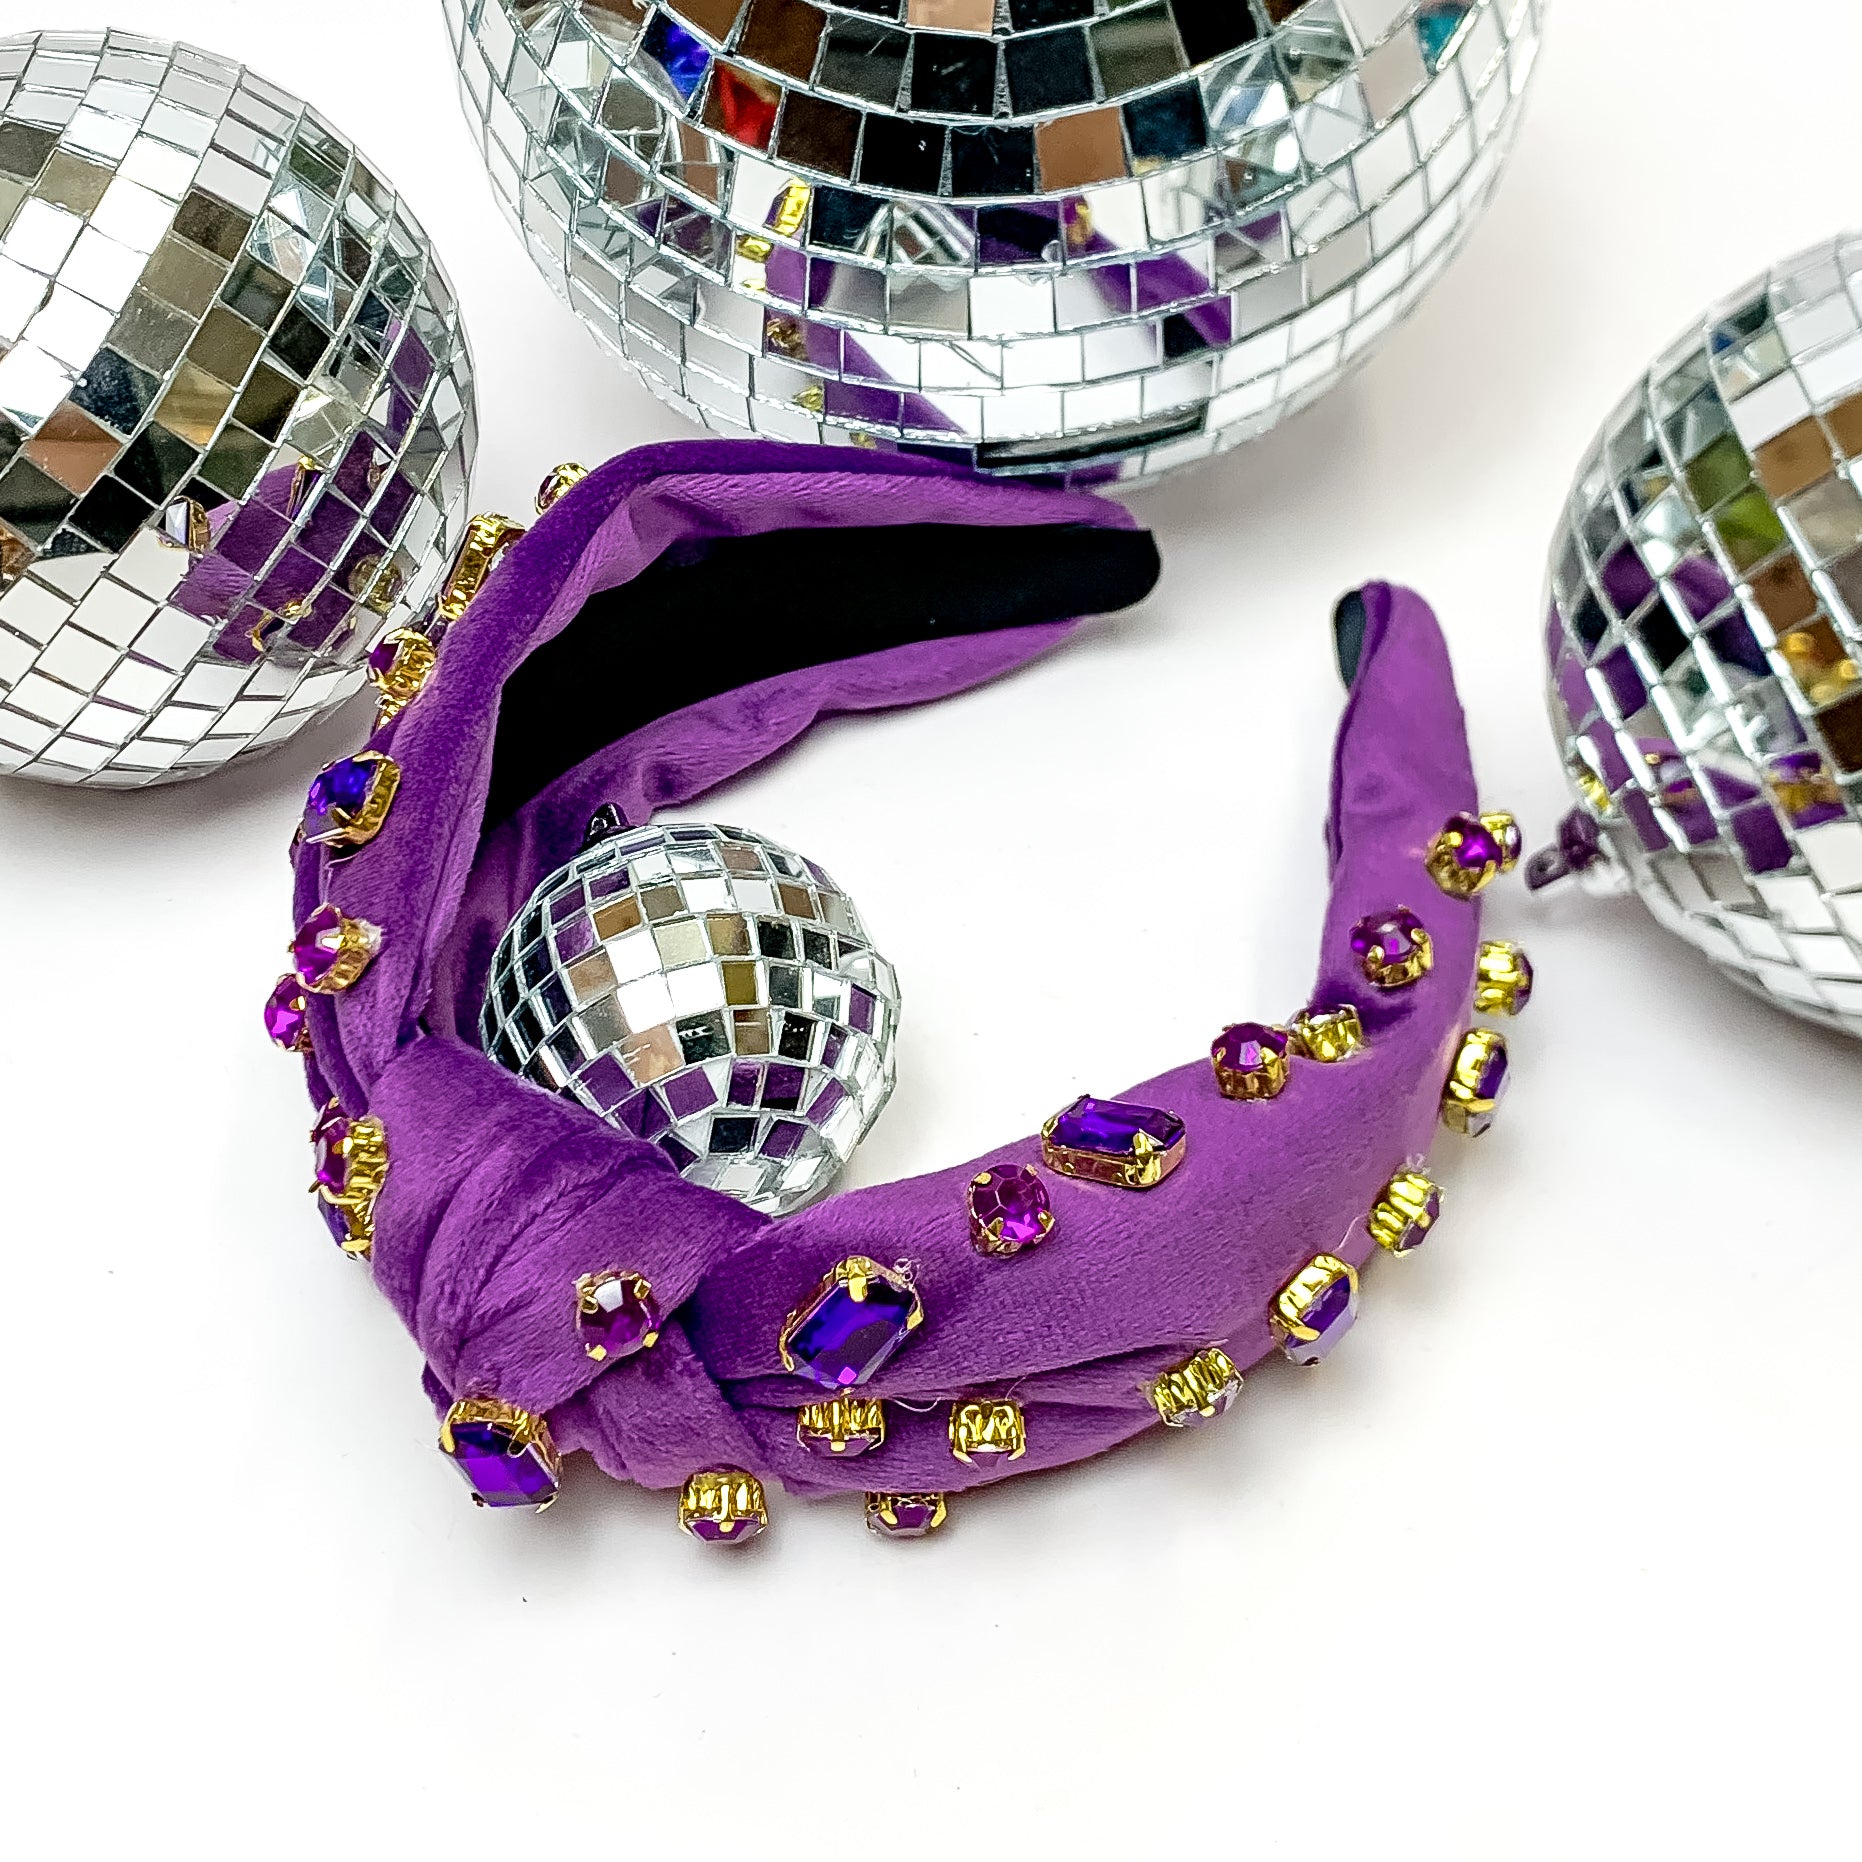 Crystal Detailed Velvet Knot Headband in Purple. This headband is pictured on a white background and is surrounded by disco balls.